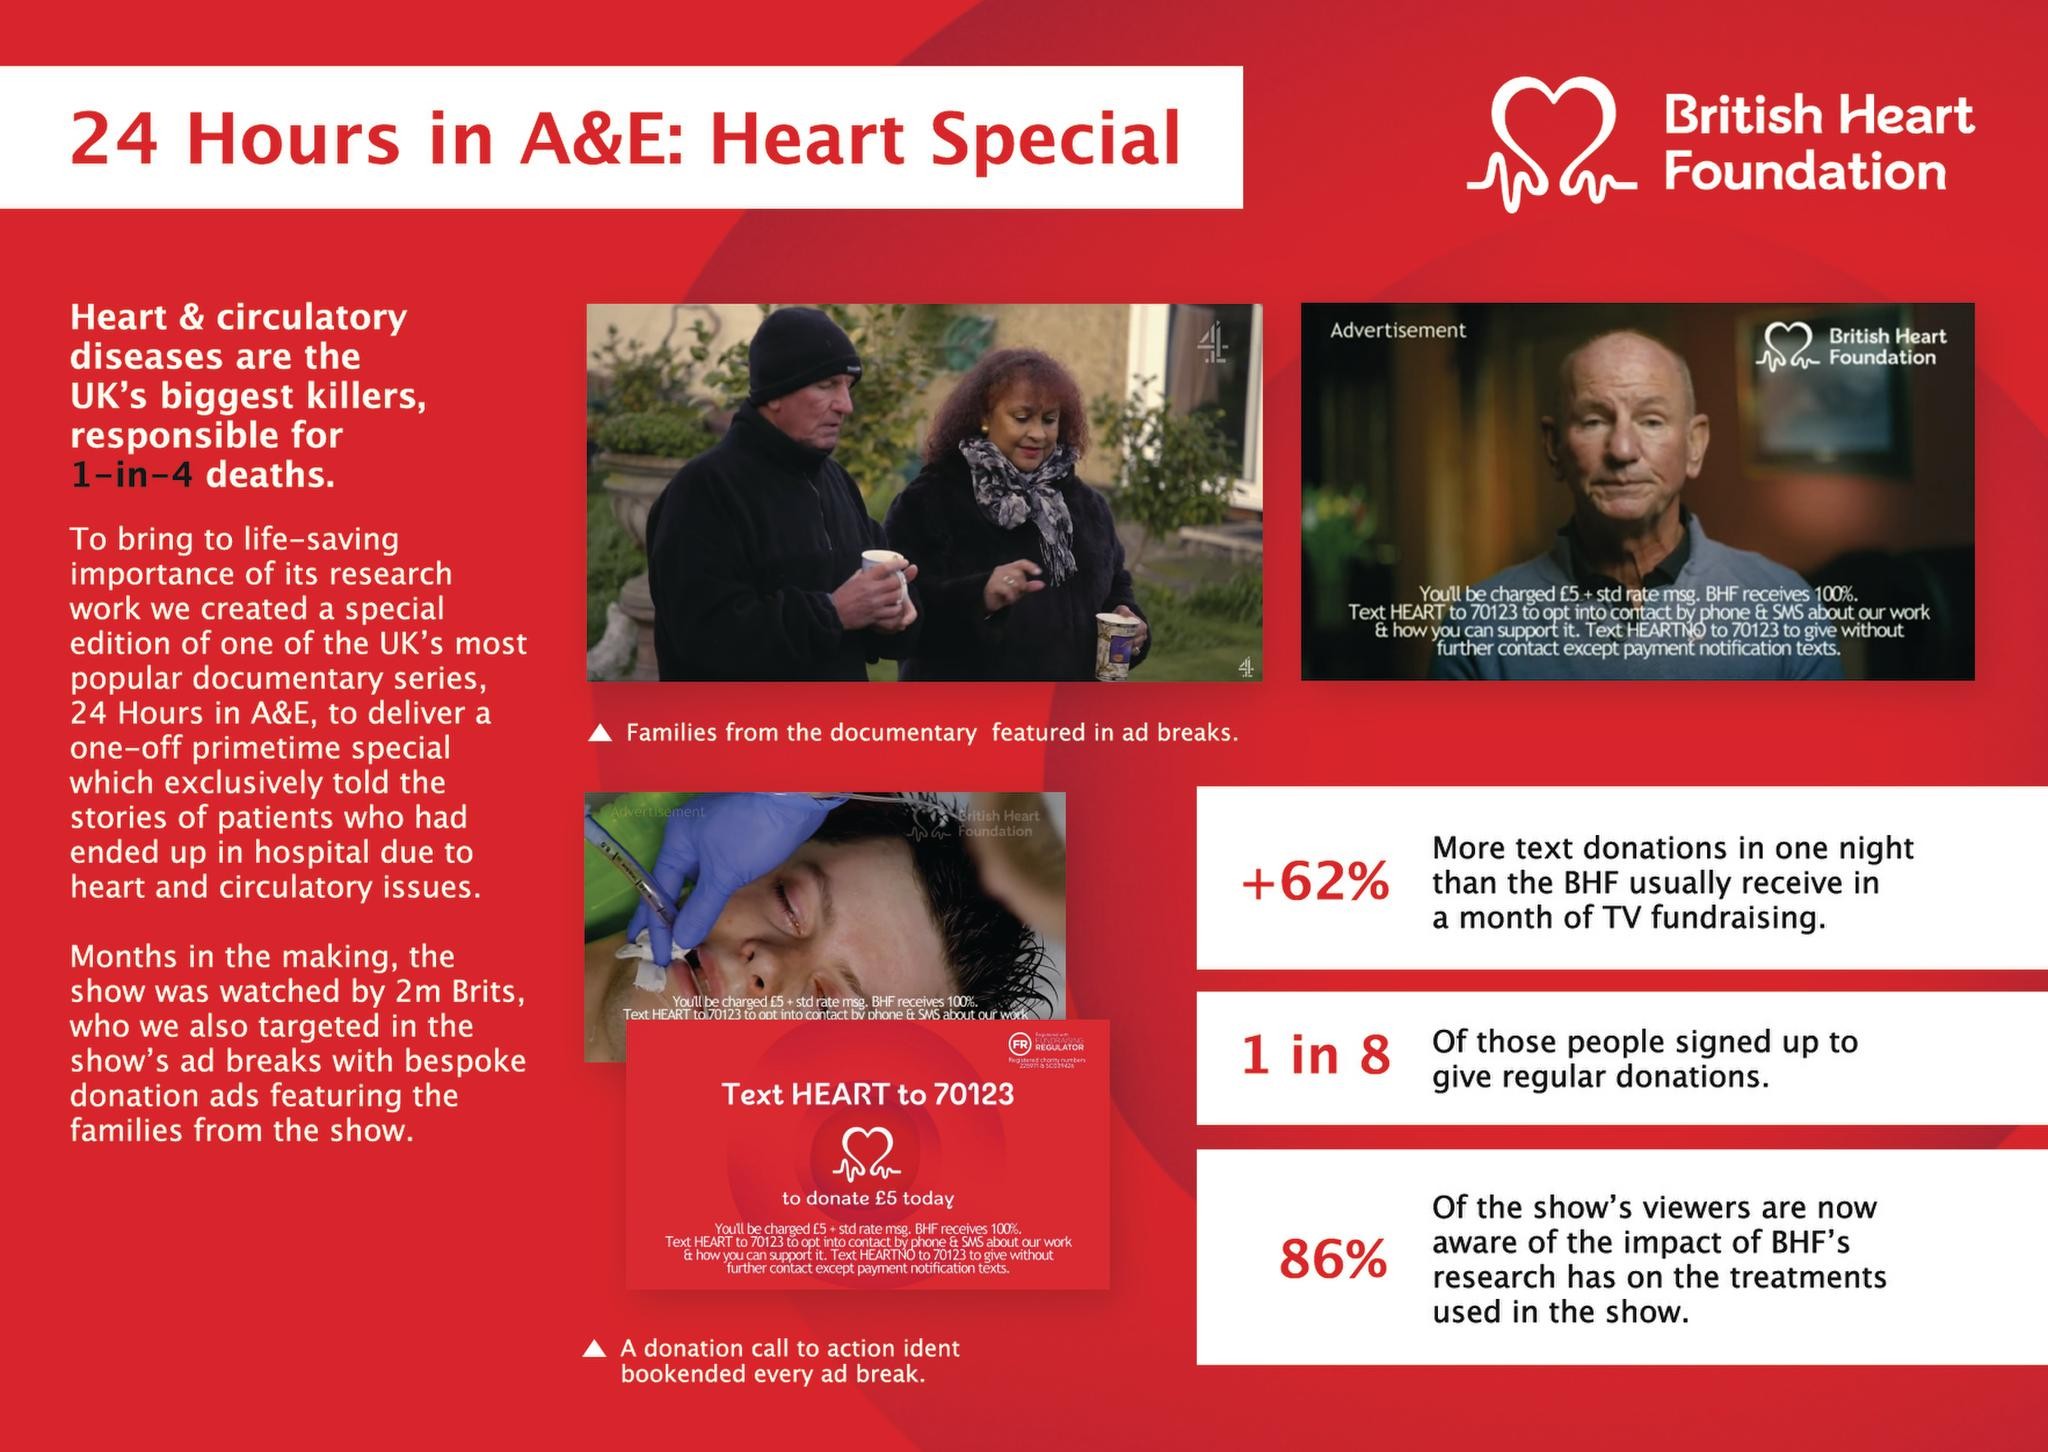 BHF 24 Hours in A&E special